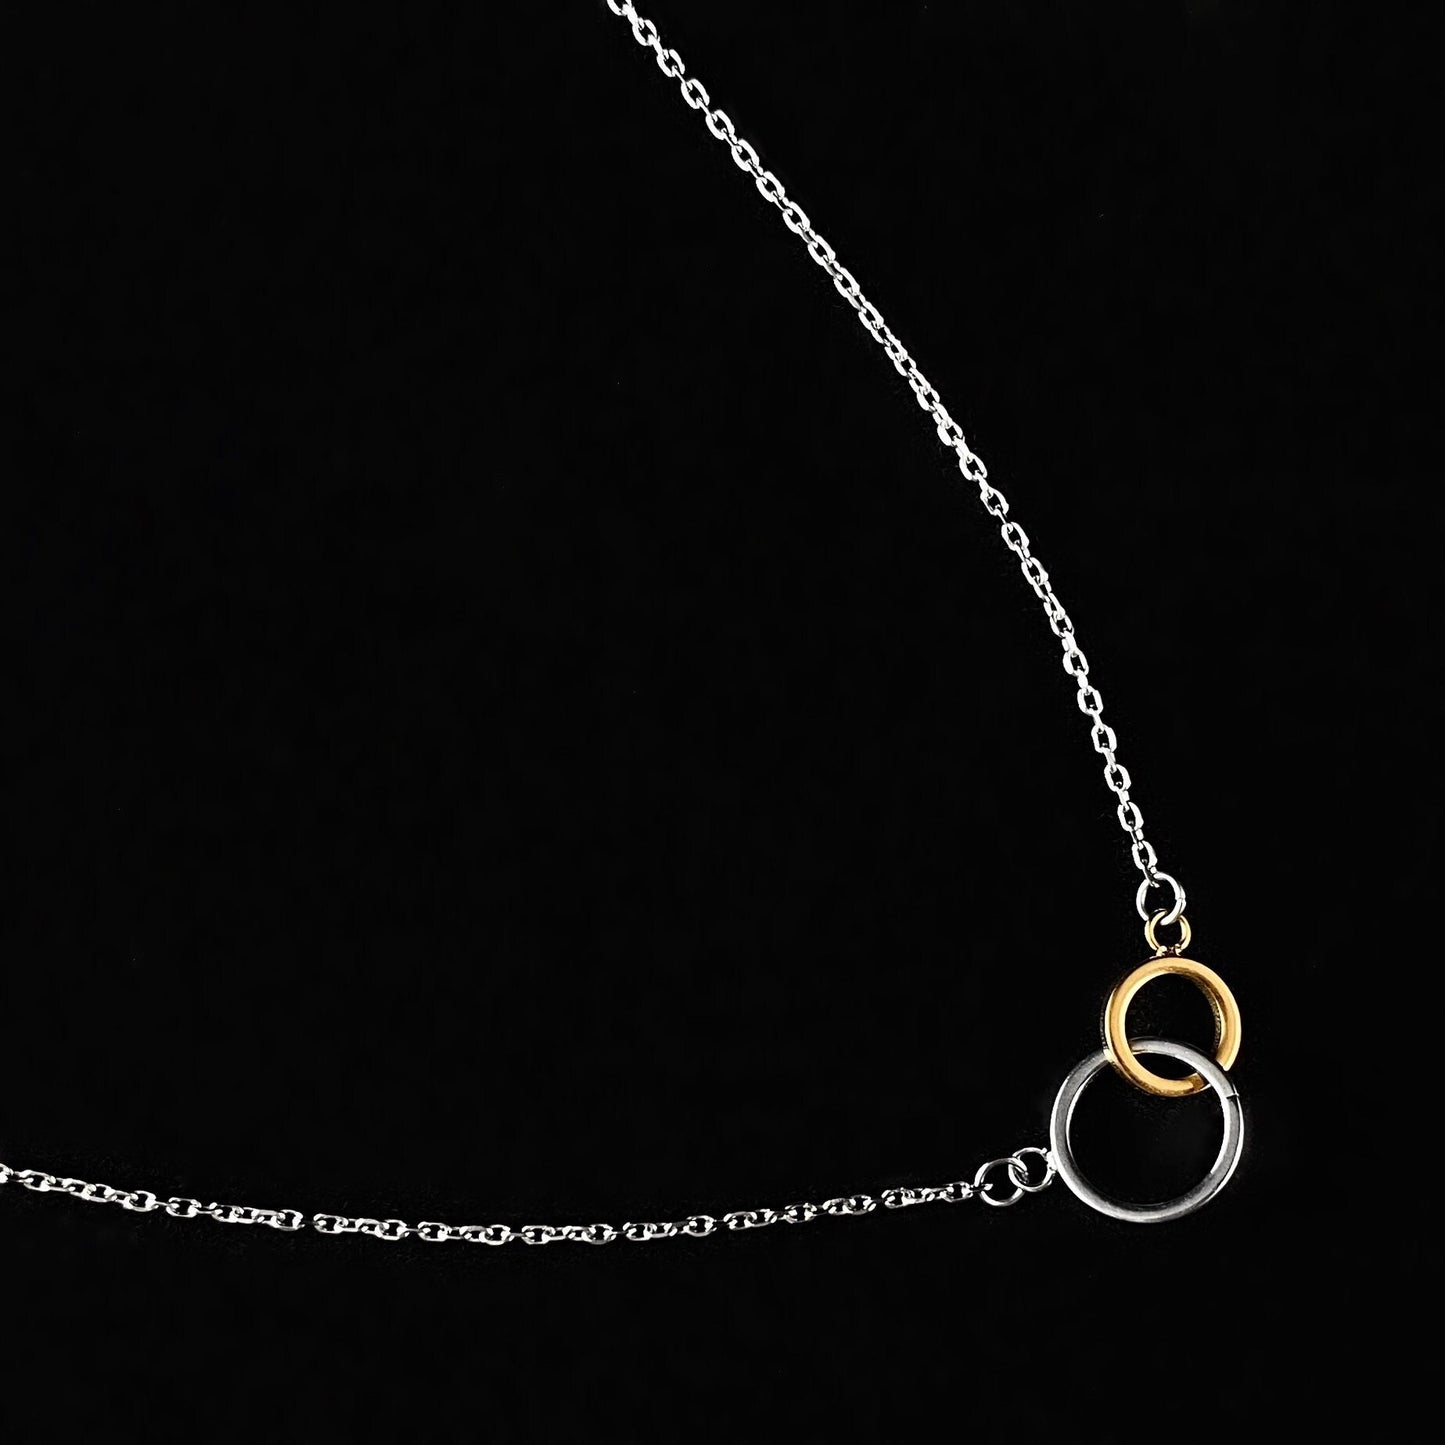 Dainty Silver and Gold Double Circle Pendant Necklace - Sabrina